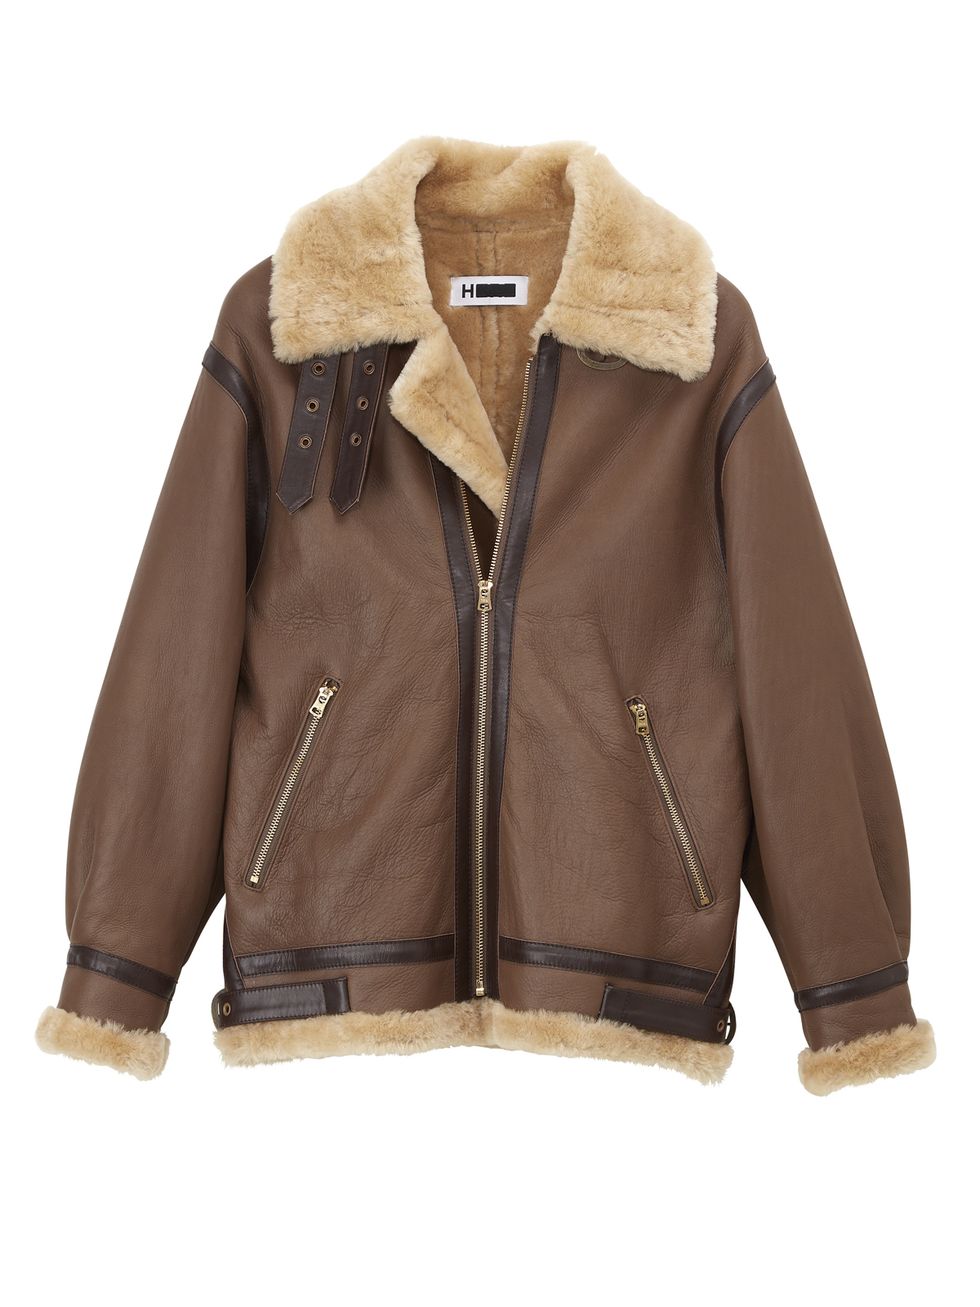 Clothing, Jacket, Outerwear, Leather, Fur, Sleeve, Brown, Leather jacket, Beige, Fur clothing, 